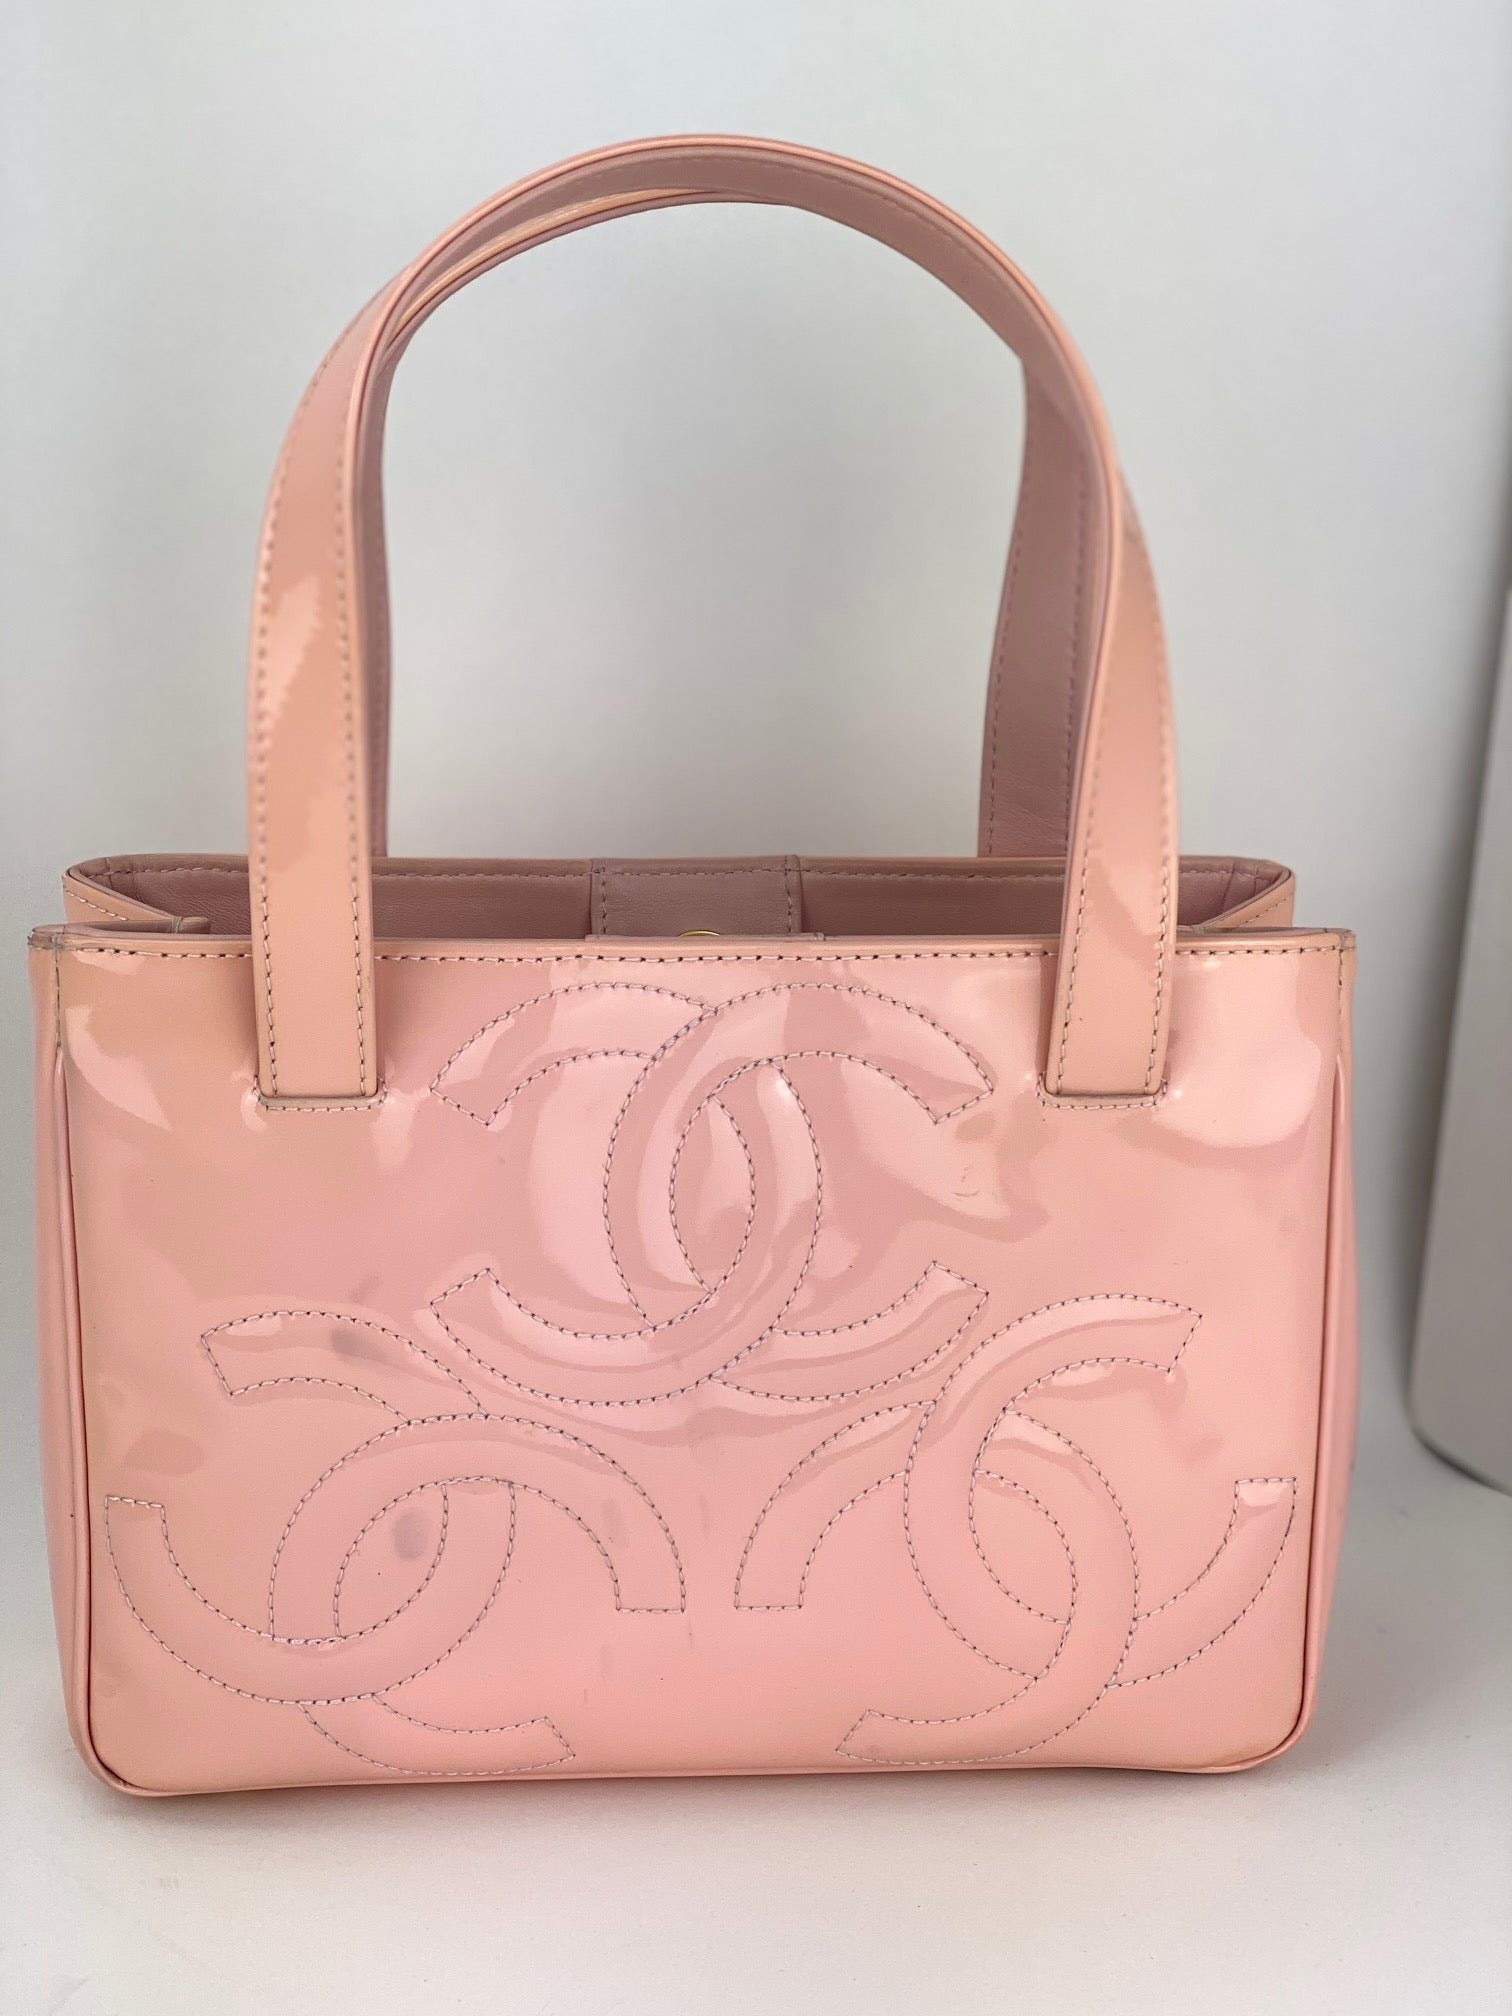 CHANEL Chanel Triple CC Logo Small Pink Patent Leather Tote